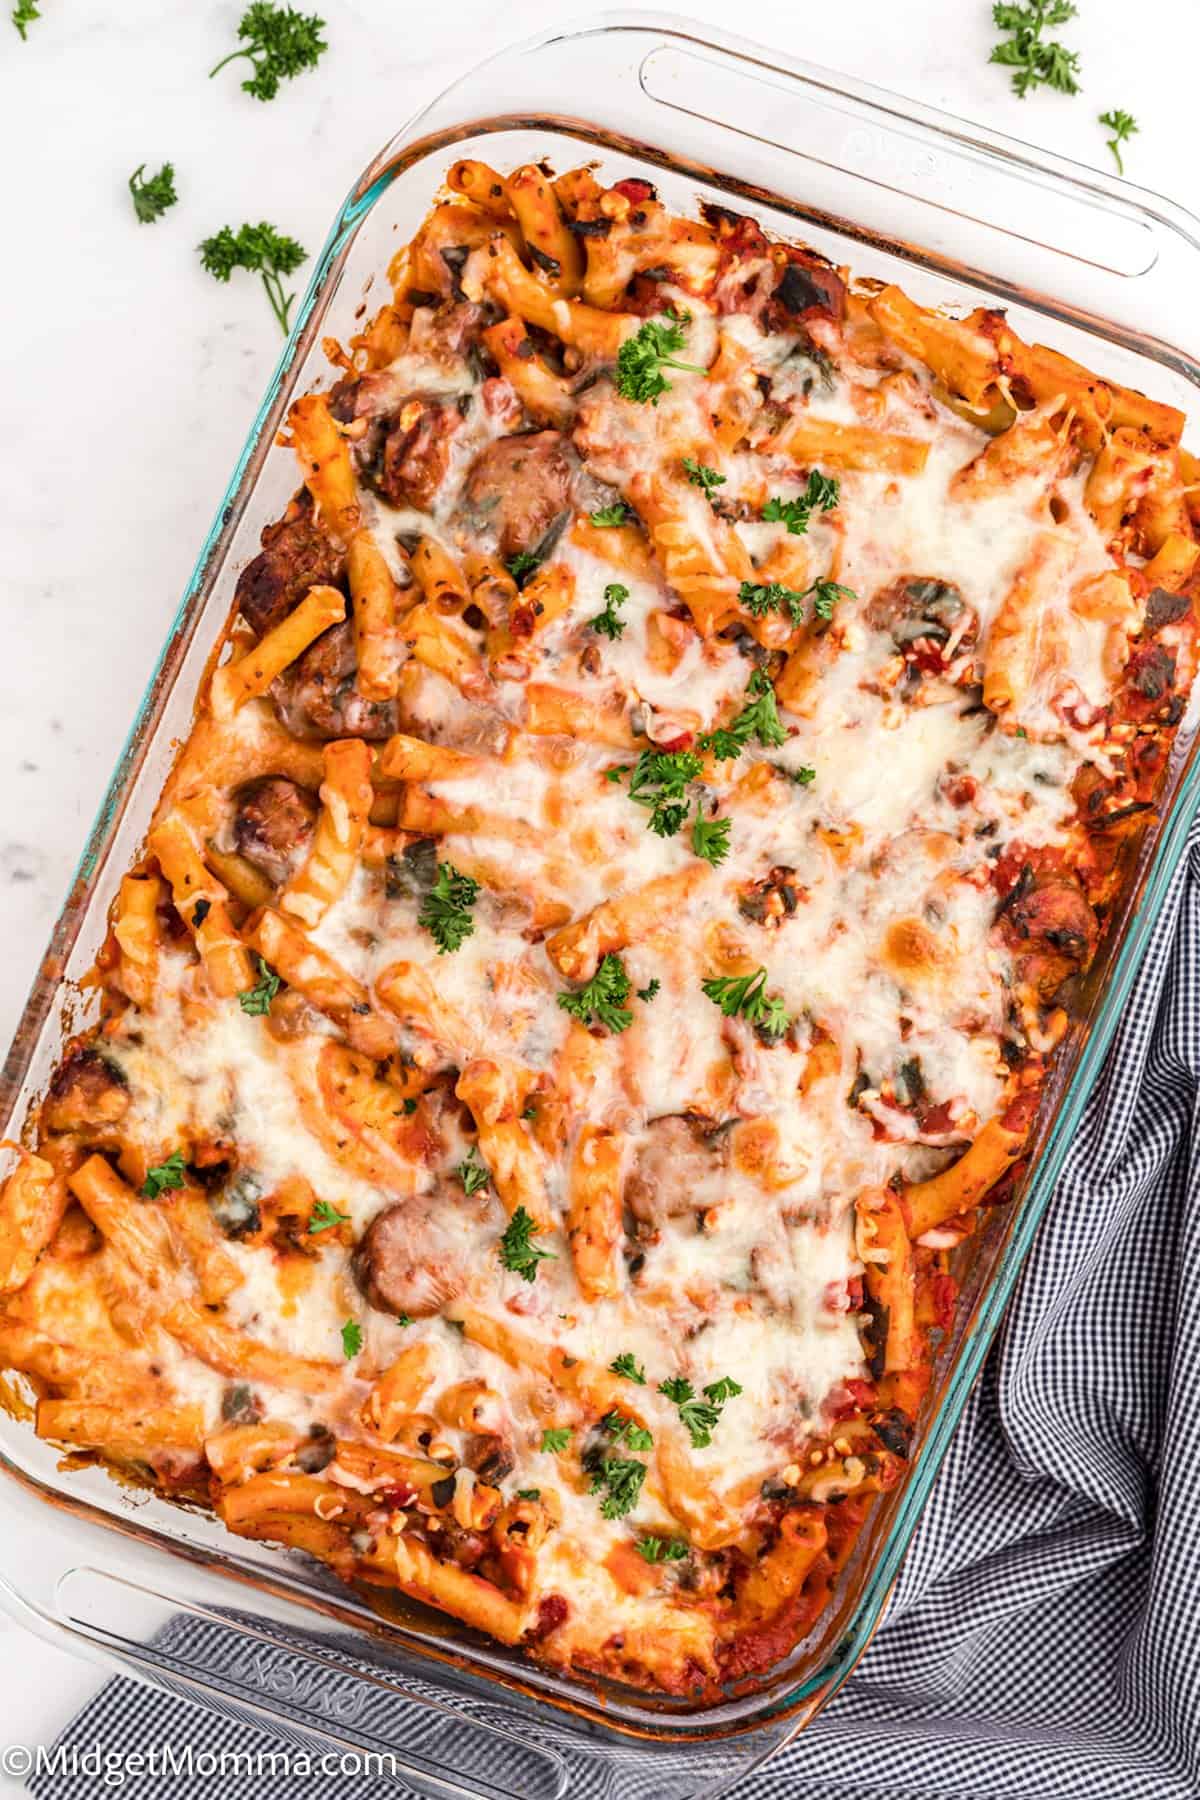 Sausage and Spinach Baked Ziti recipe in a baking dish